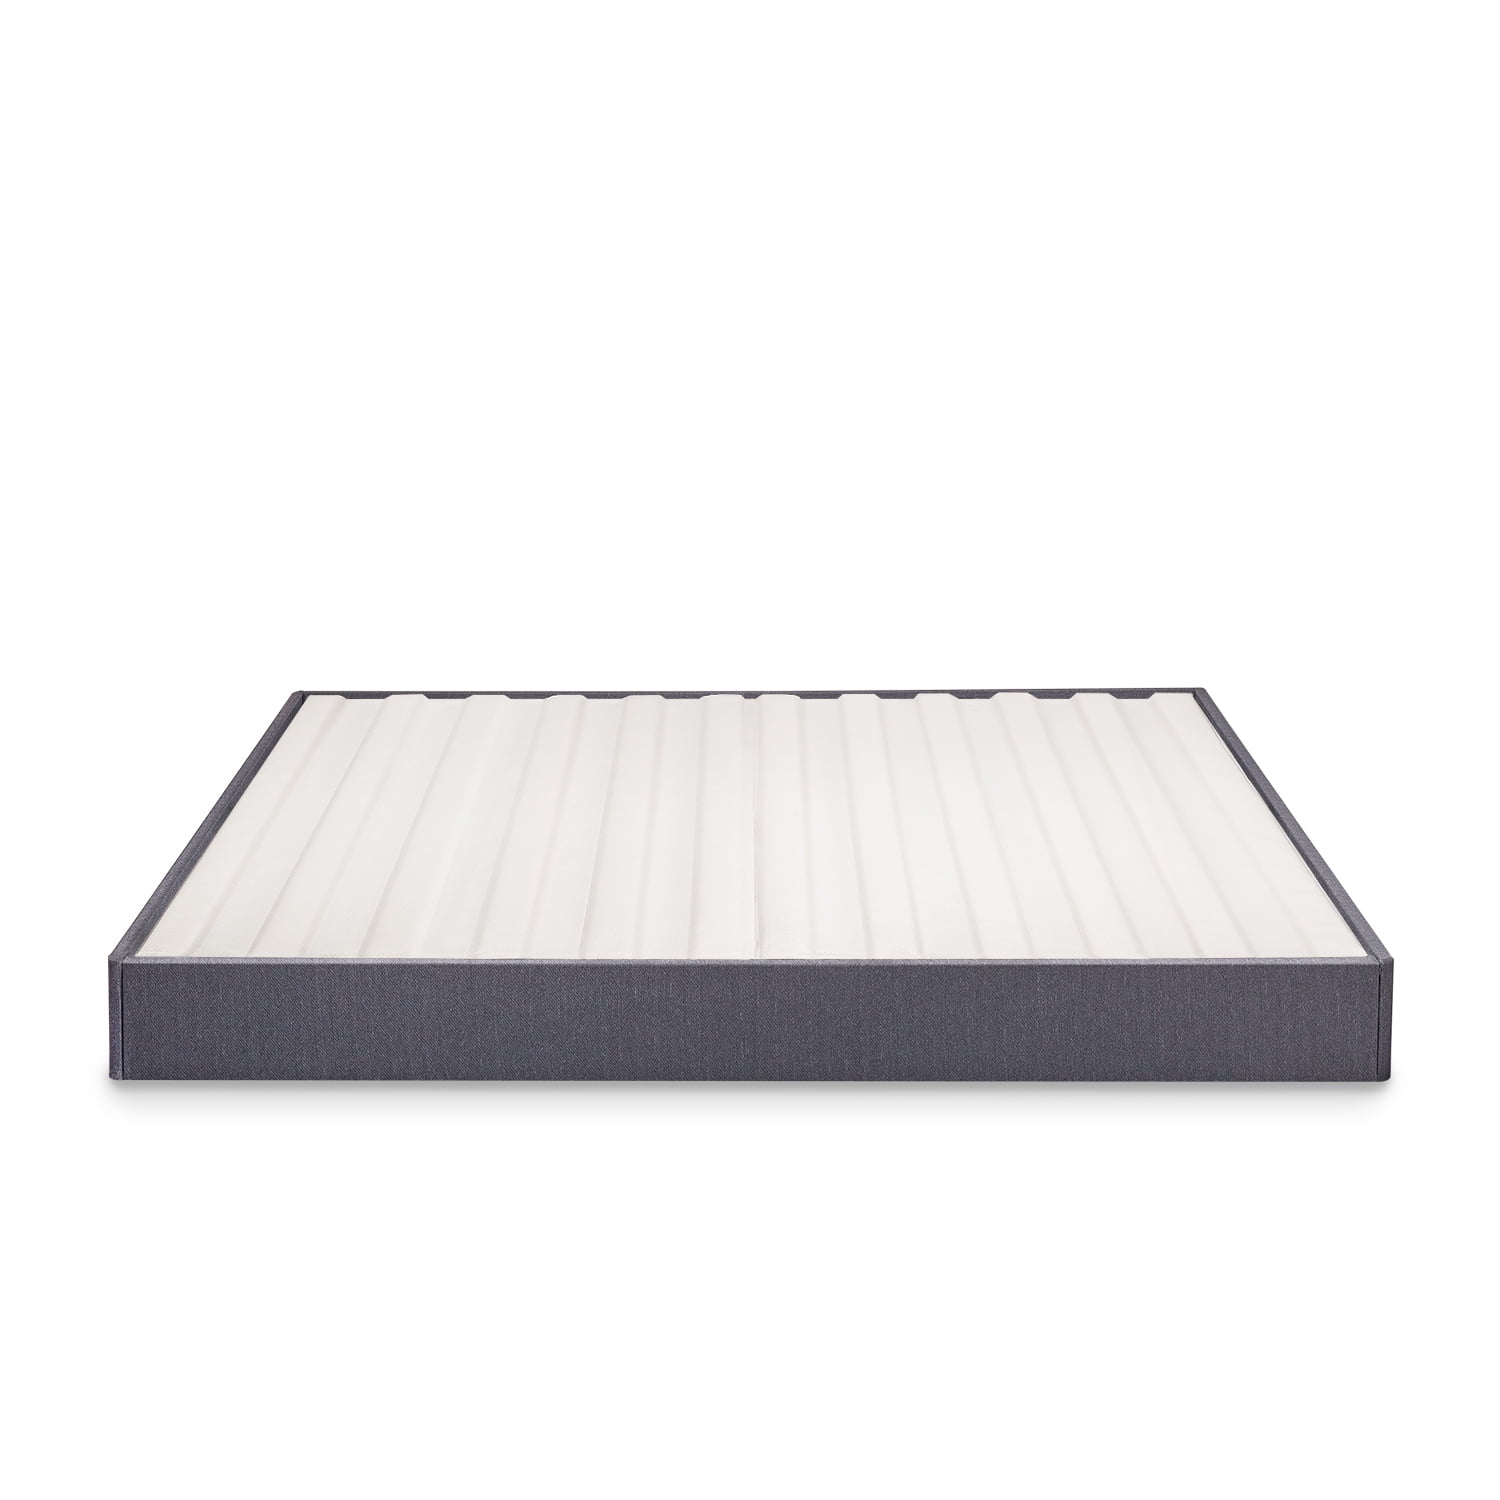 4 Inch Low Profile Metal Box Spring with Wood Slats Multiple Sizes 